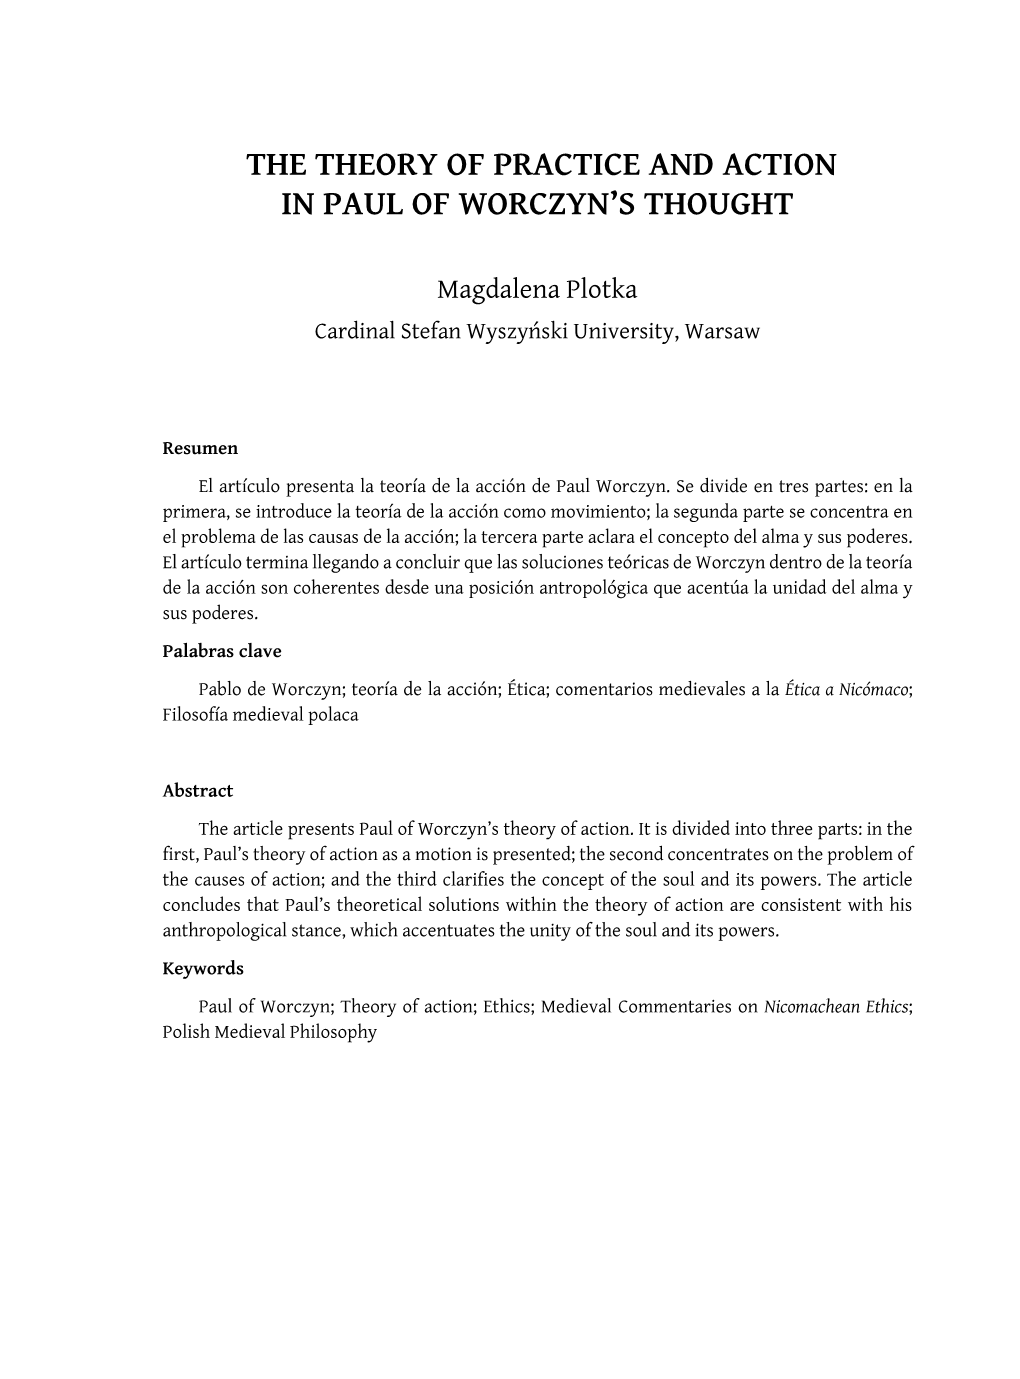 The Theory of Practice and Action in Paul of Worczyn's